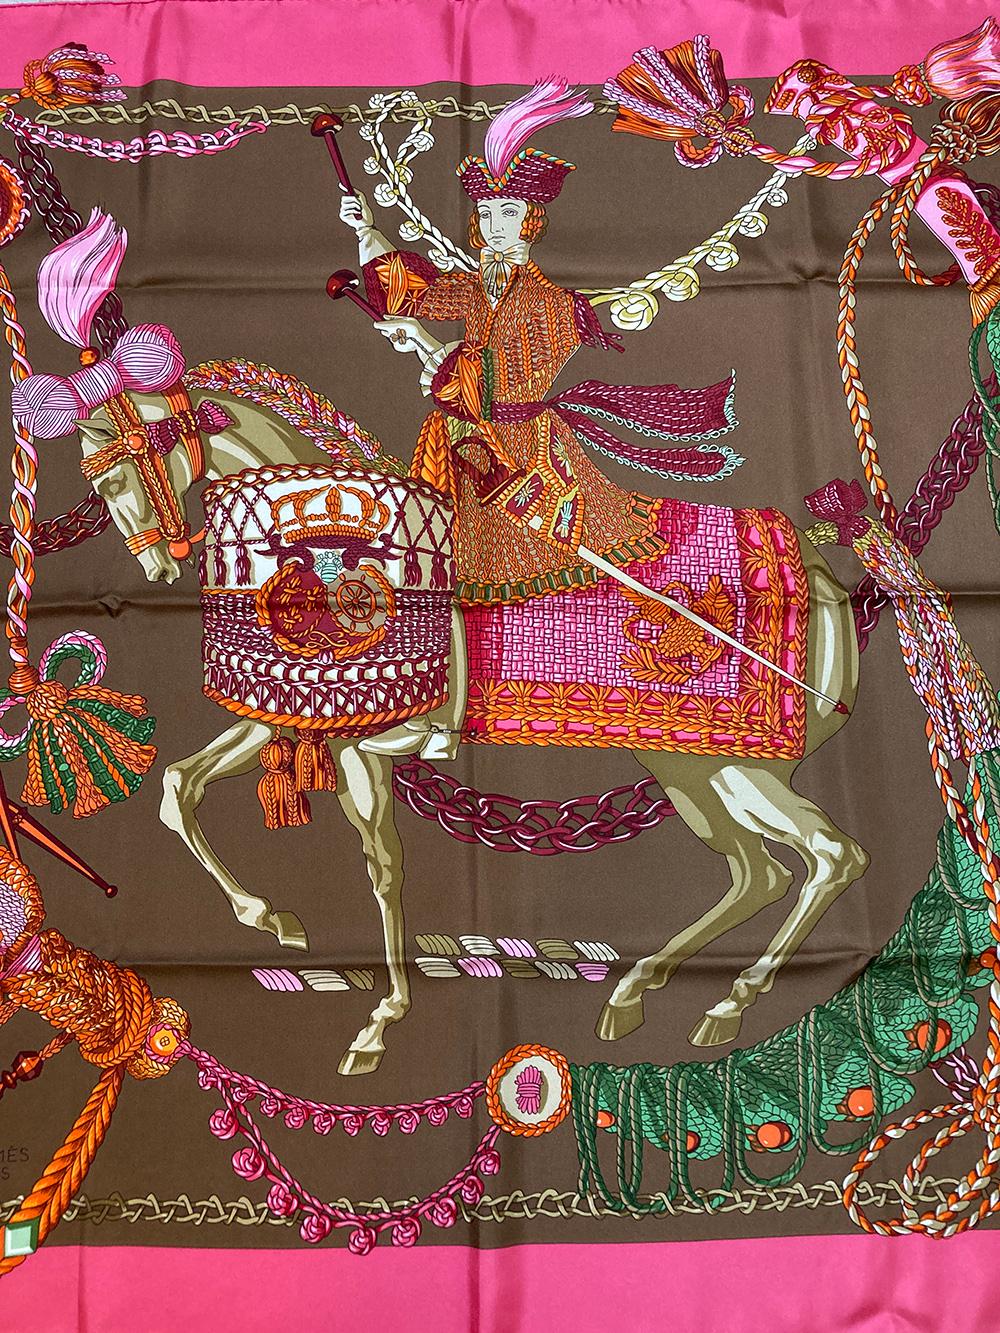 Hermes Le Timbalier Silk Scarf in Pink and Brown c1960s 1